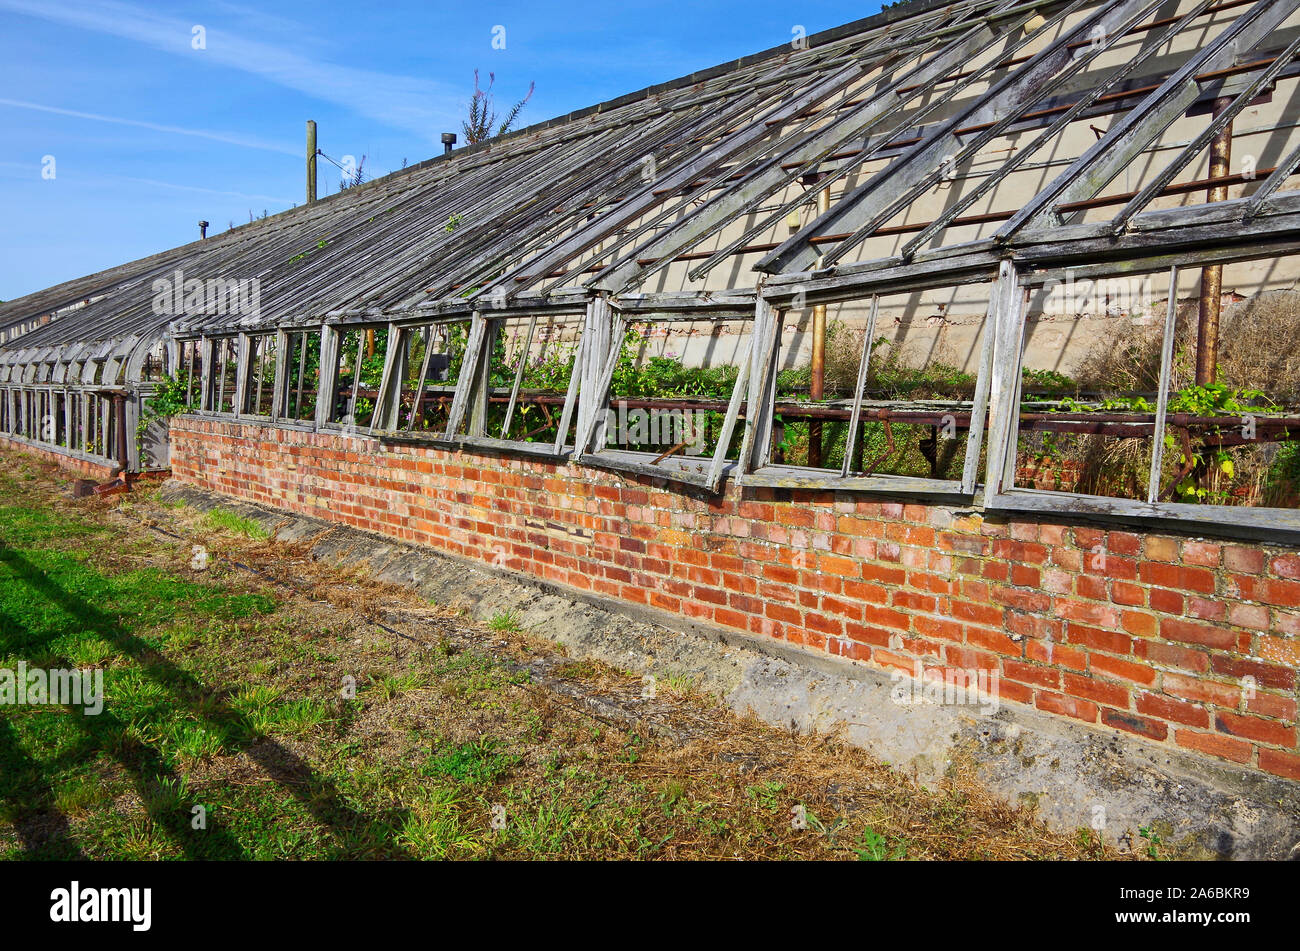 Abandoned and picturesquely decaying glass houses built against a south-facing wall in the grounds of Harewood House, Yorkshire Stock Photo